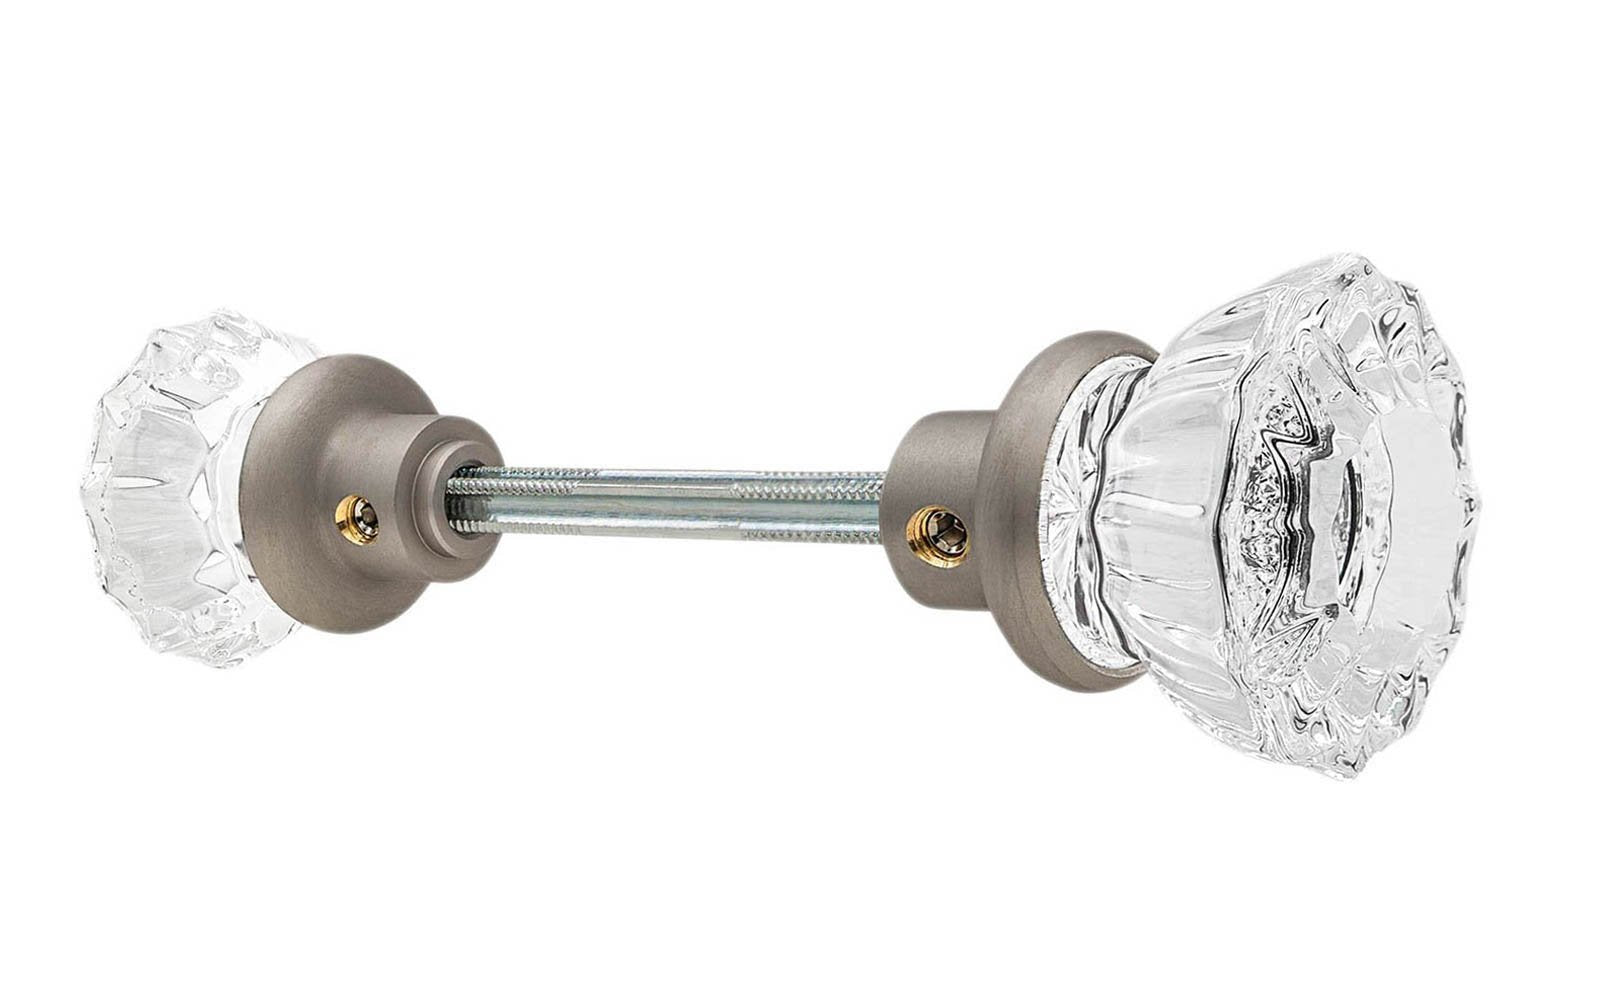 Pair of Classic Fluted Clear Glass Doorknobs with spindle. A high quality & genuine glass doorknob set with an attractive fluted design. The sparkling center point under glass amplifies reflected light to showcase beautiful facets. Solid brass base. Reproduction Glass Door Knobs. Traditional Fluted Glass Knobs. Brushed Nickel Finish.